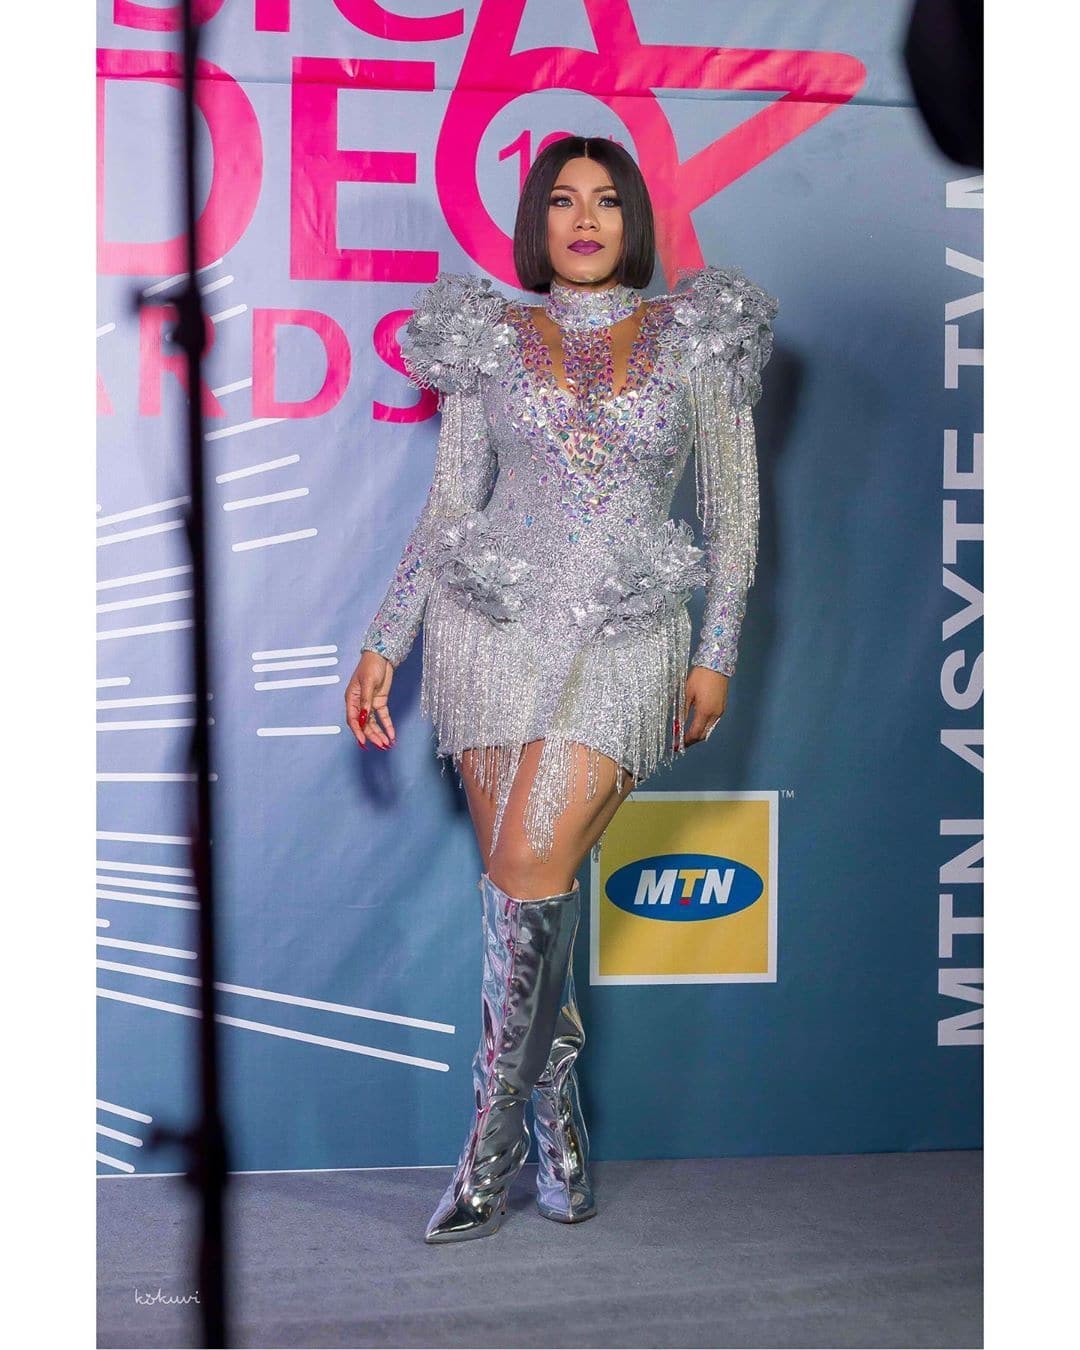 Zynnell-zuh-metallic-outfit-the-most-rave-worthy-looks-on-women-across-africa-african-celebs-style